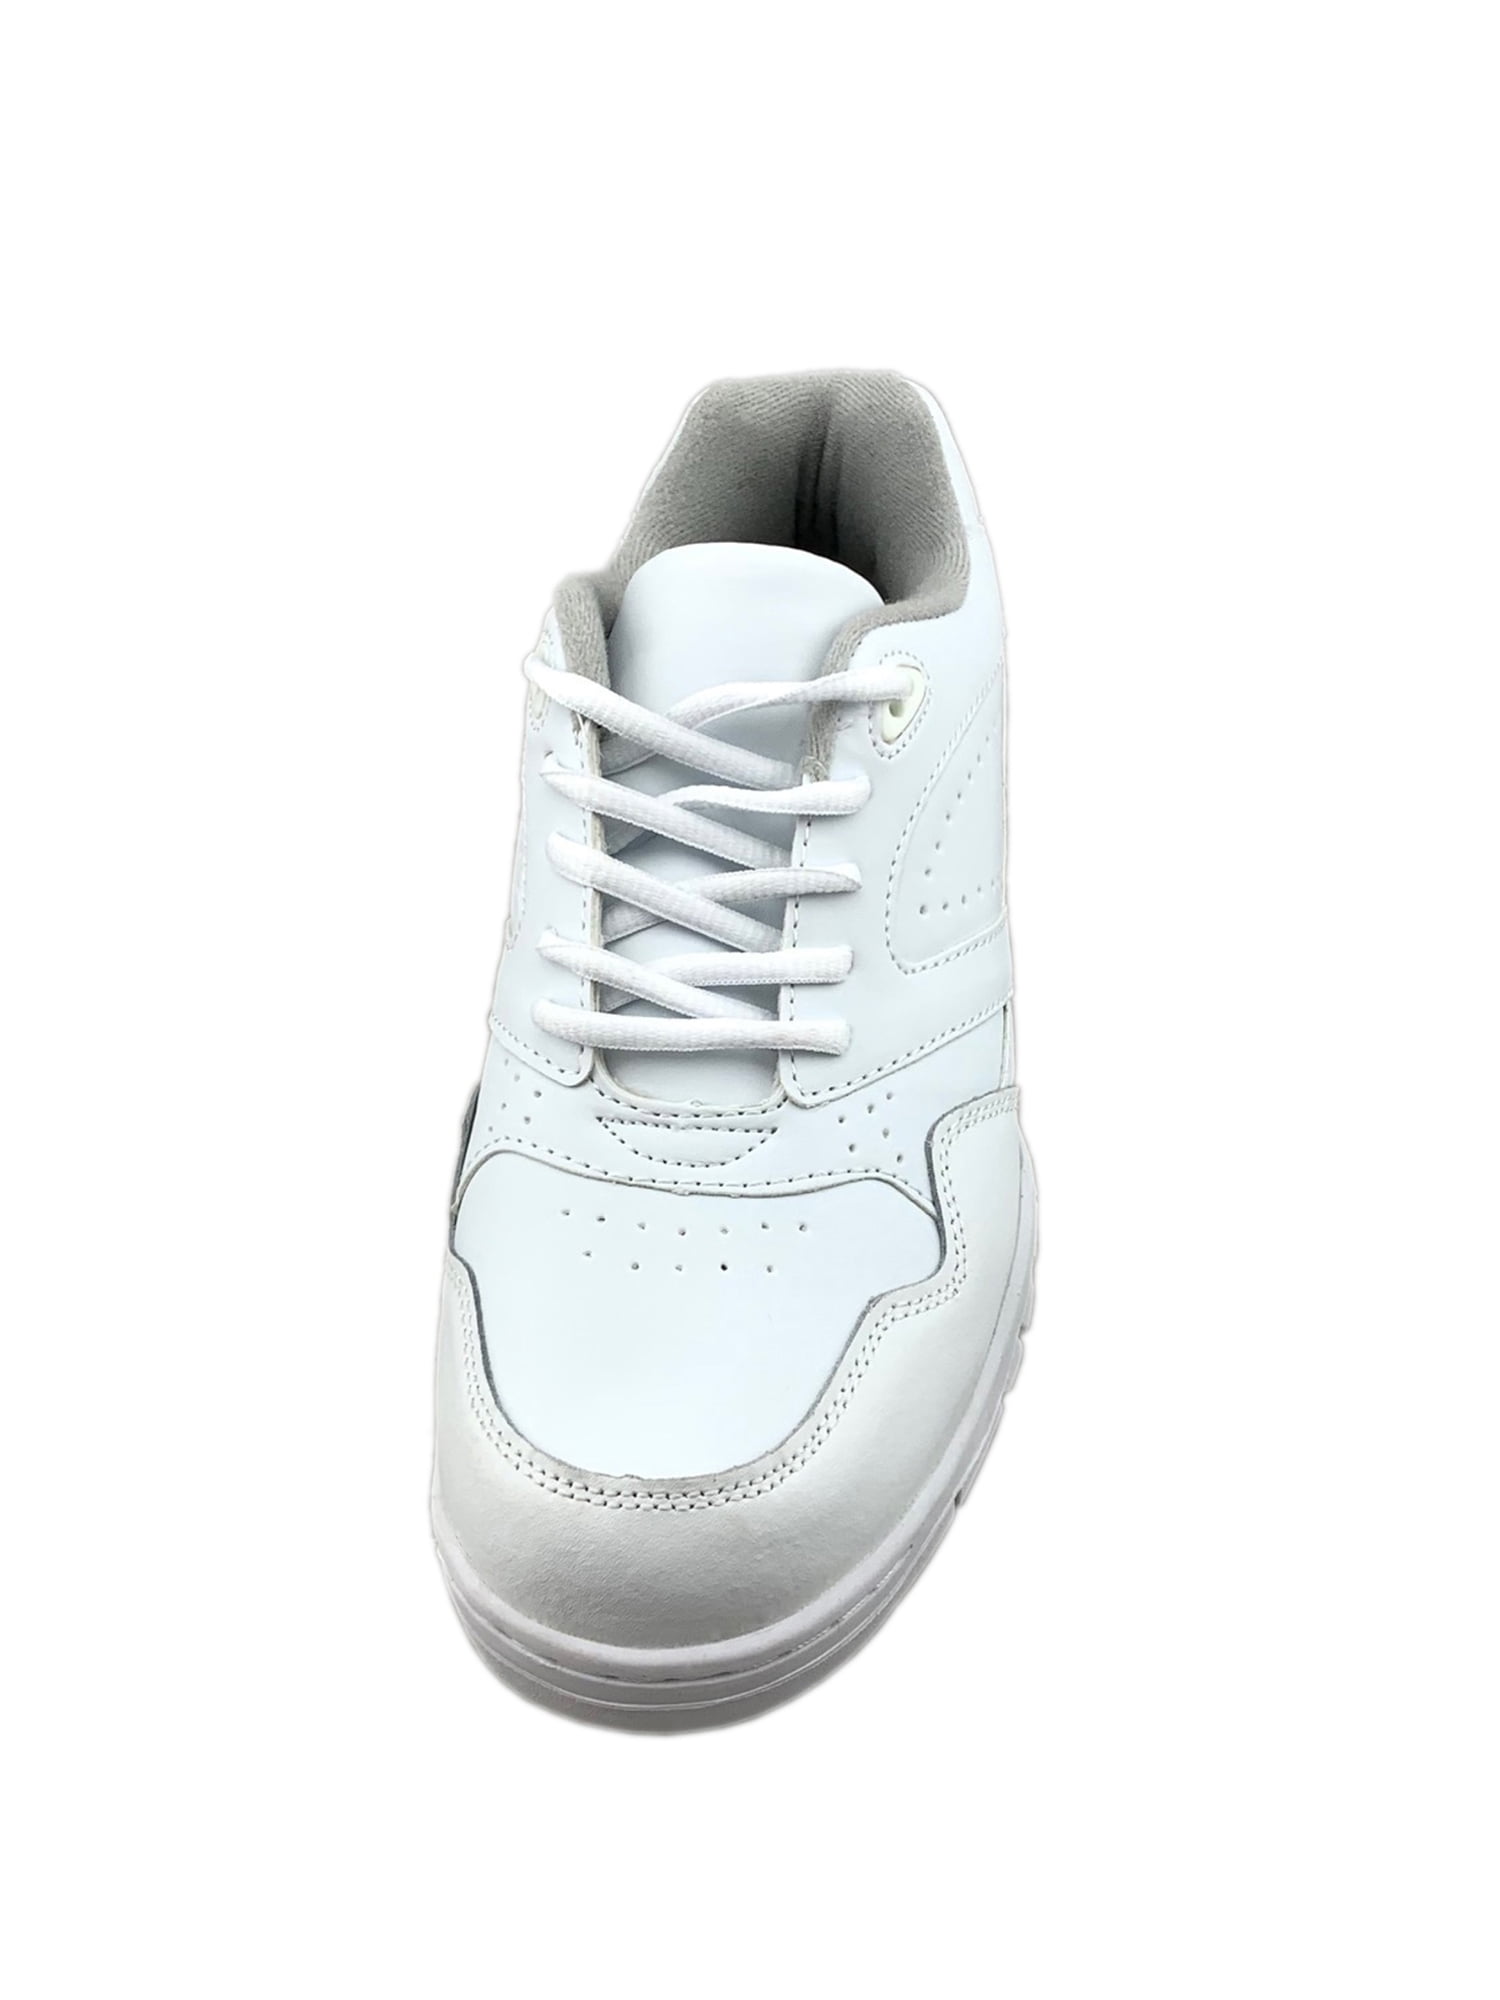 Mens White Leather Sneakers Small Size Big Size Non-Slip Comfortable Walking Running Shoes